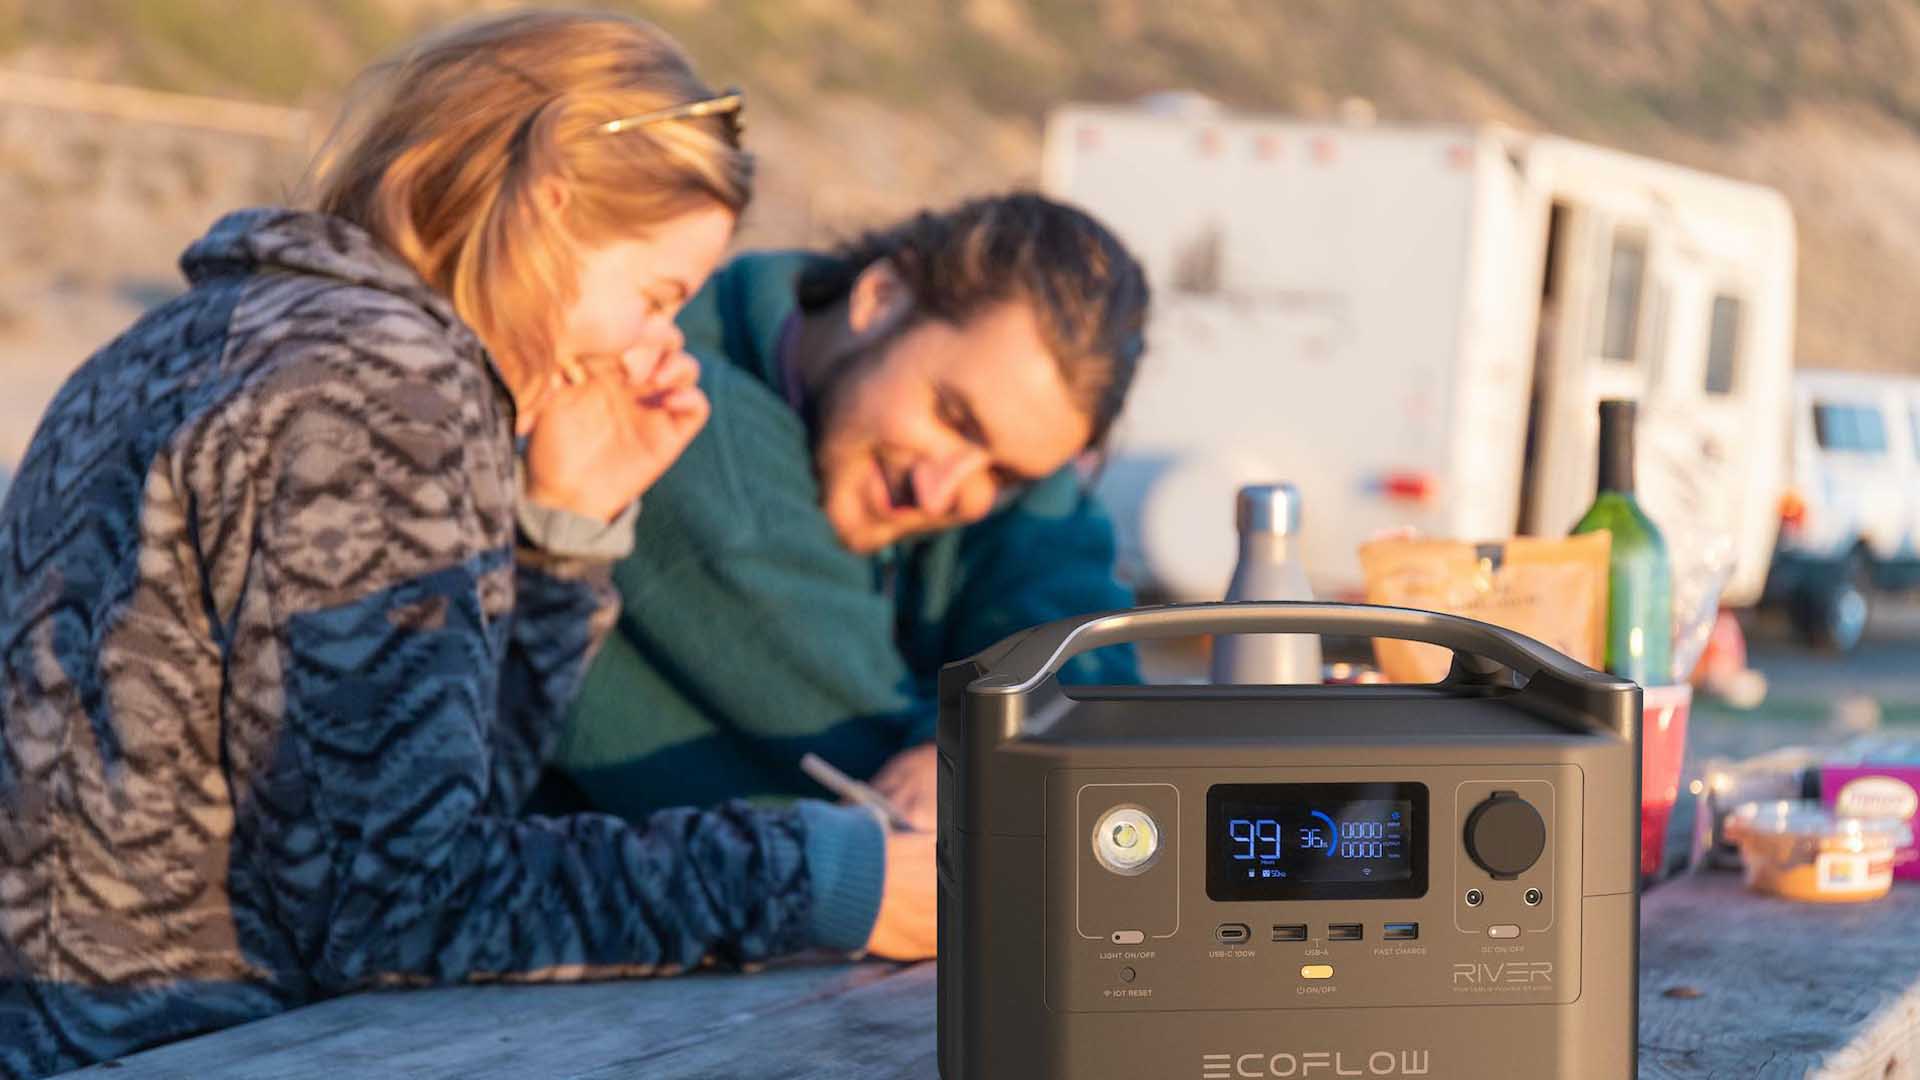 Enjoy a wonderful camping trip with portable power and renewable energy